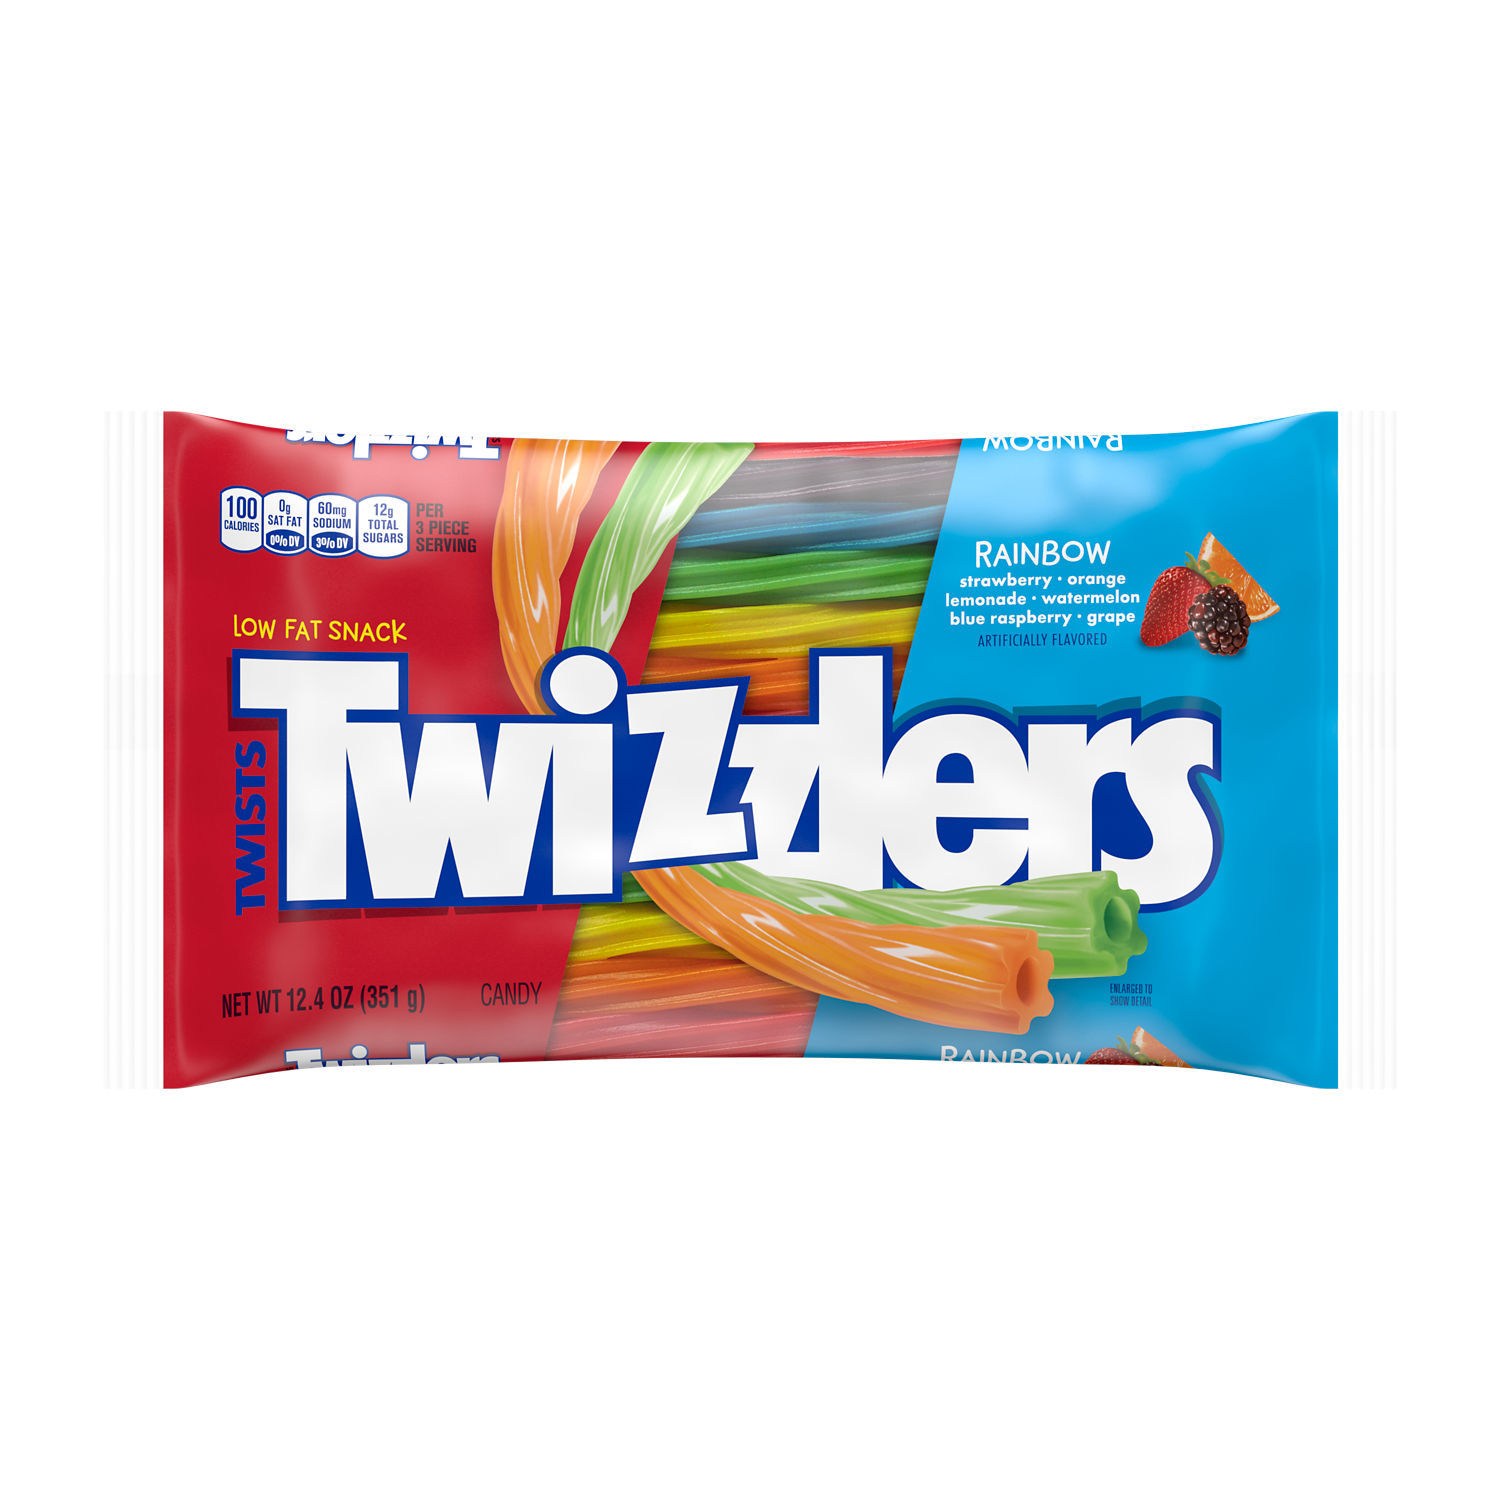 Twizzlers Twists Rainbow Flavored Licorice Style Candy, Bag 12.4 oz - image 1 of 8